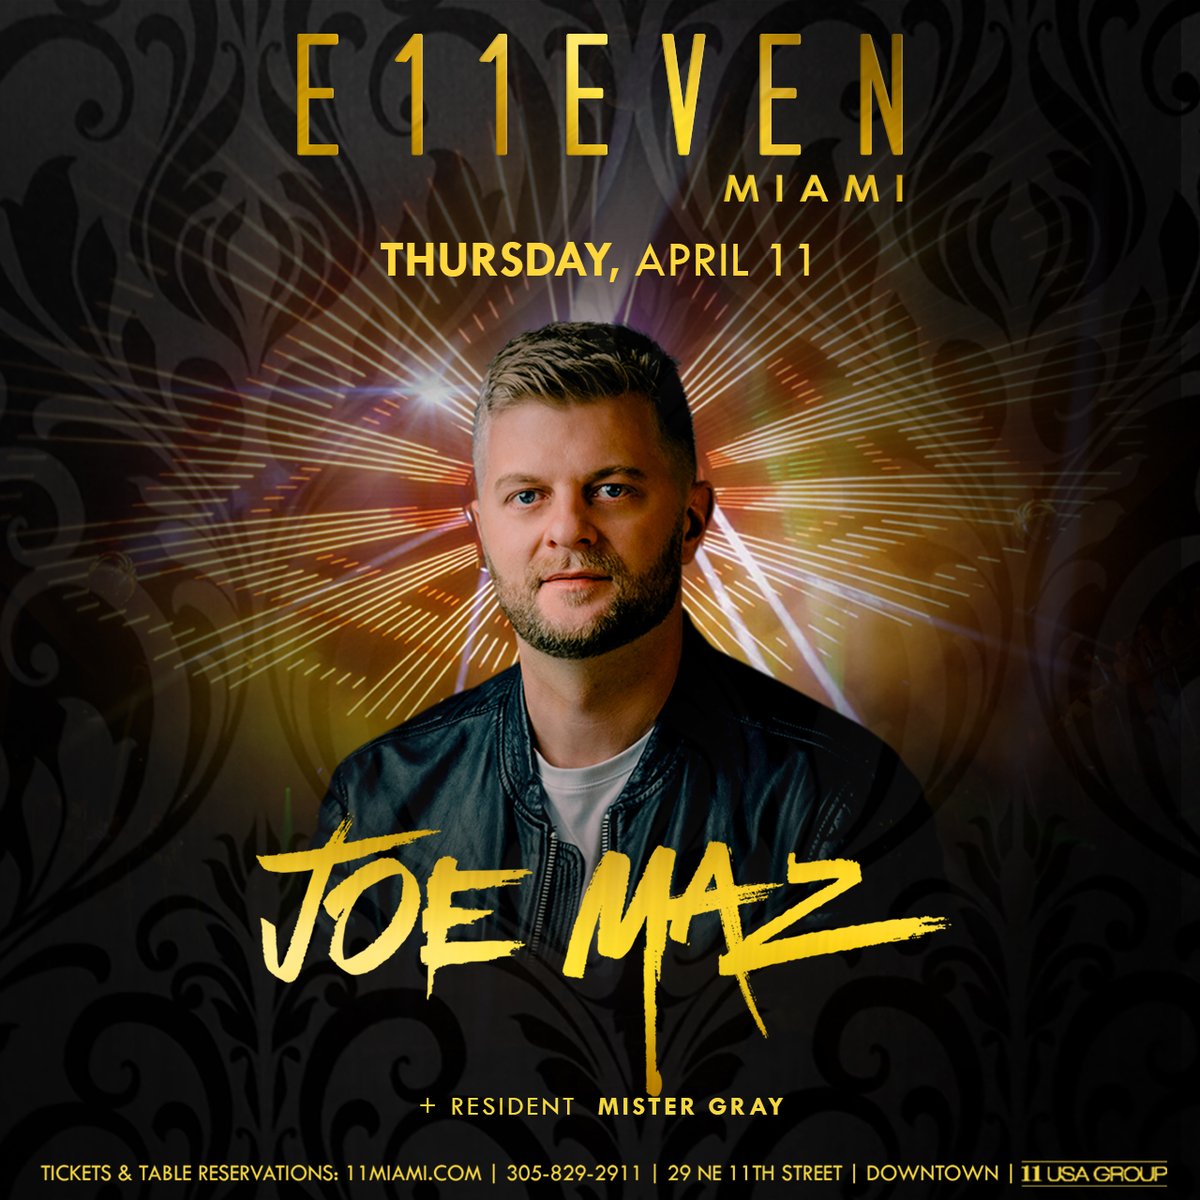 Wearing shades because your night at #E11EVEN looks so bright 😎 ⁠ Sounds by @JoeMaz ⁠ Tickets & Tables link in bio | 11miami.com⁠ #11Miami #MiamiNights